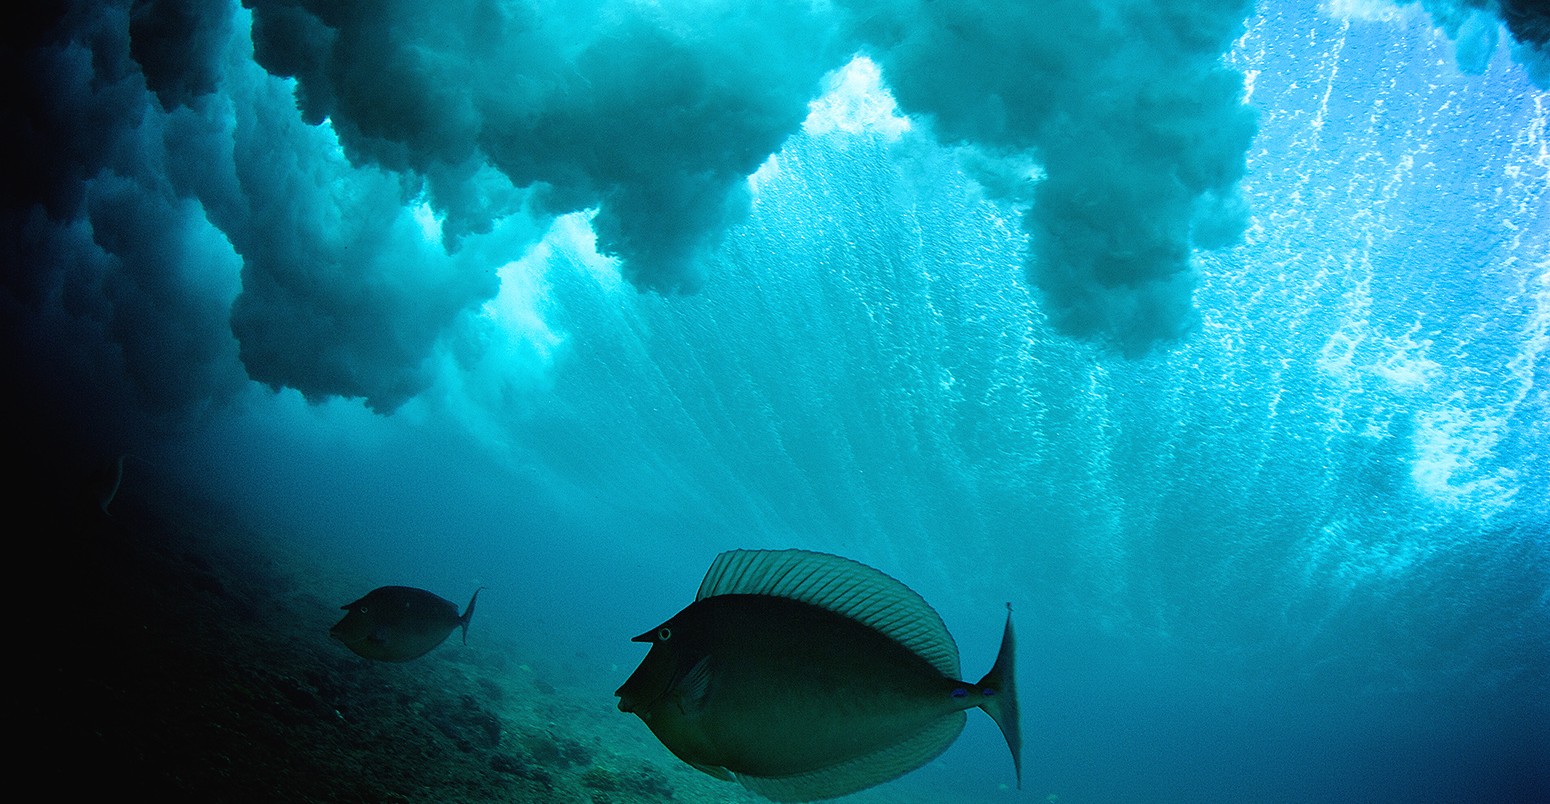 Unicorn fish swims under a cloudy breaking wave in a tropical ocean